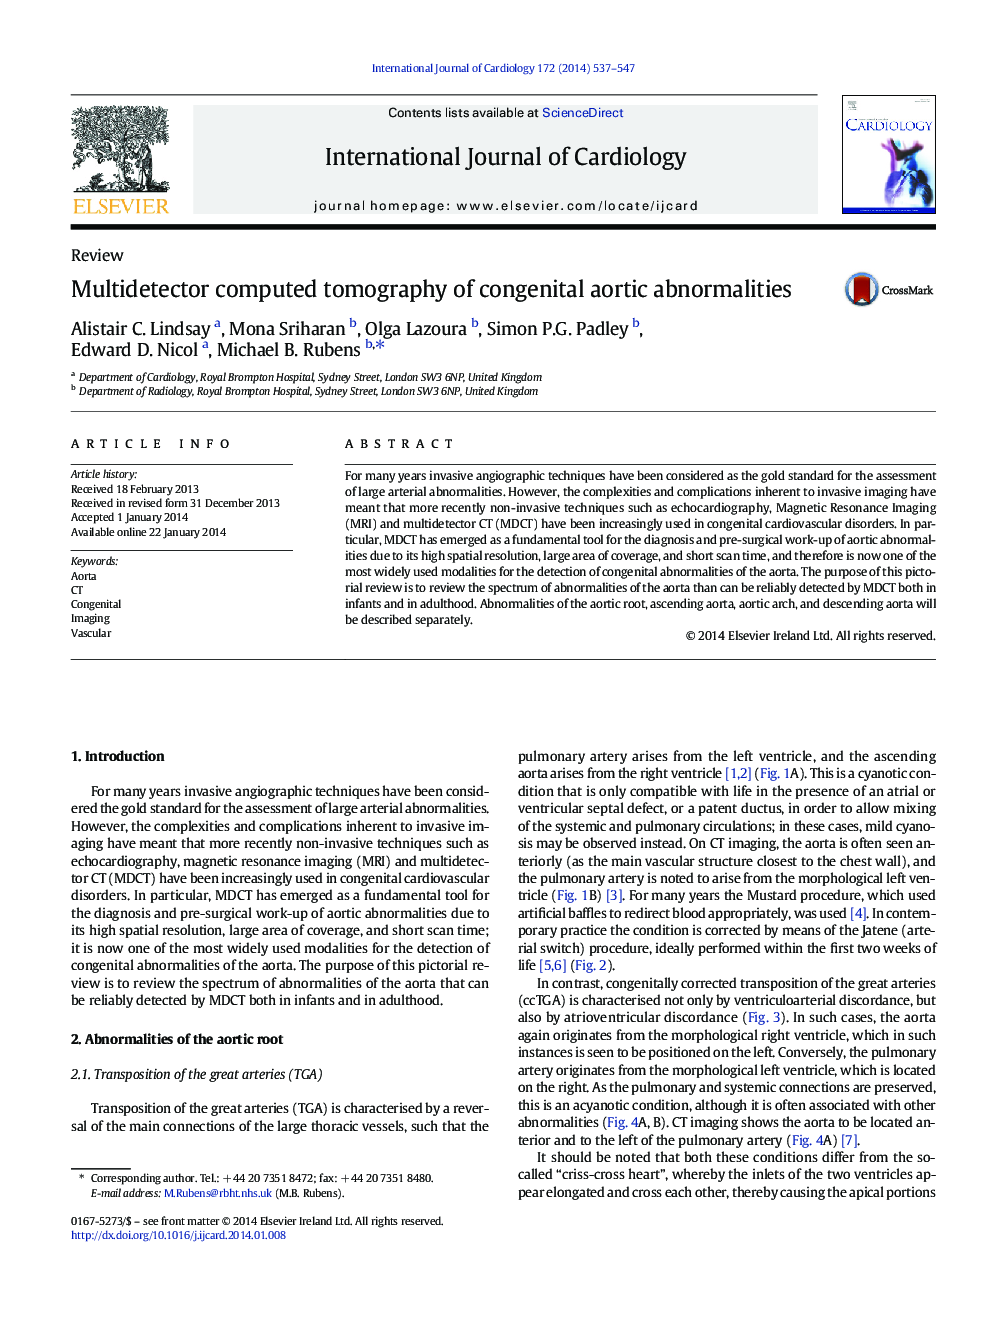 Multidetector computed tomography of congenital aortic abnormalities